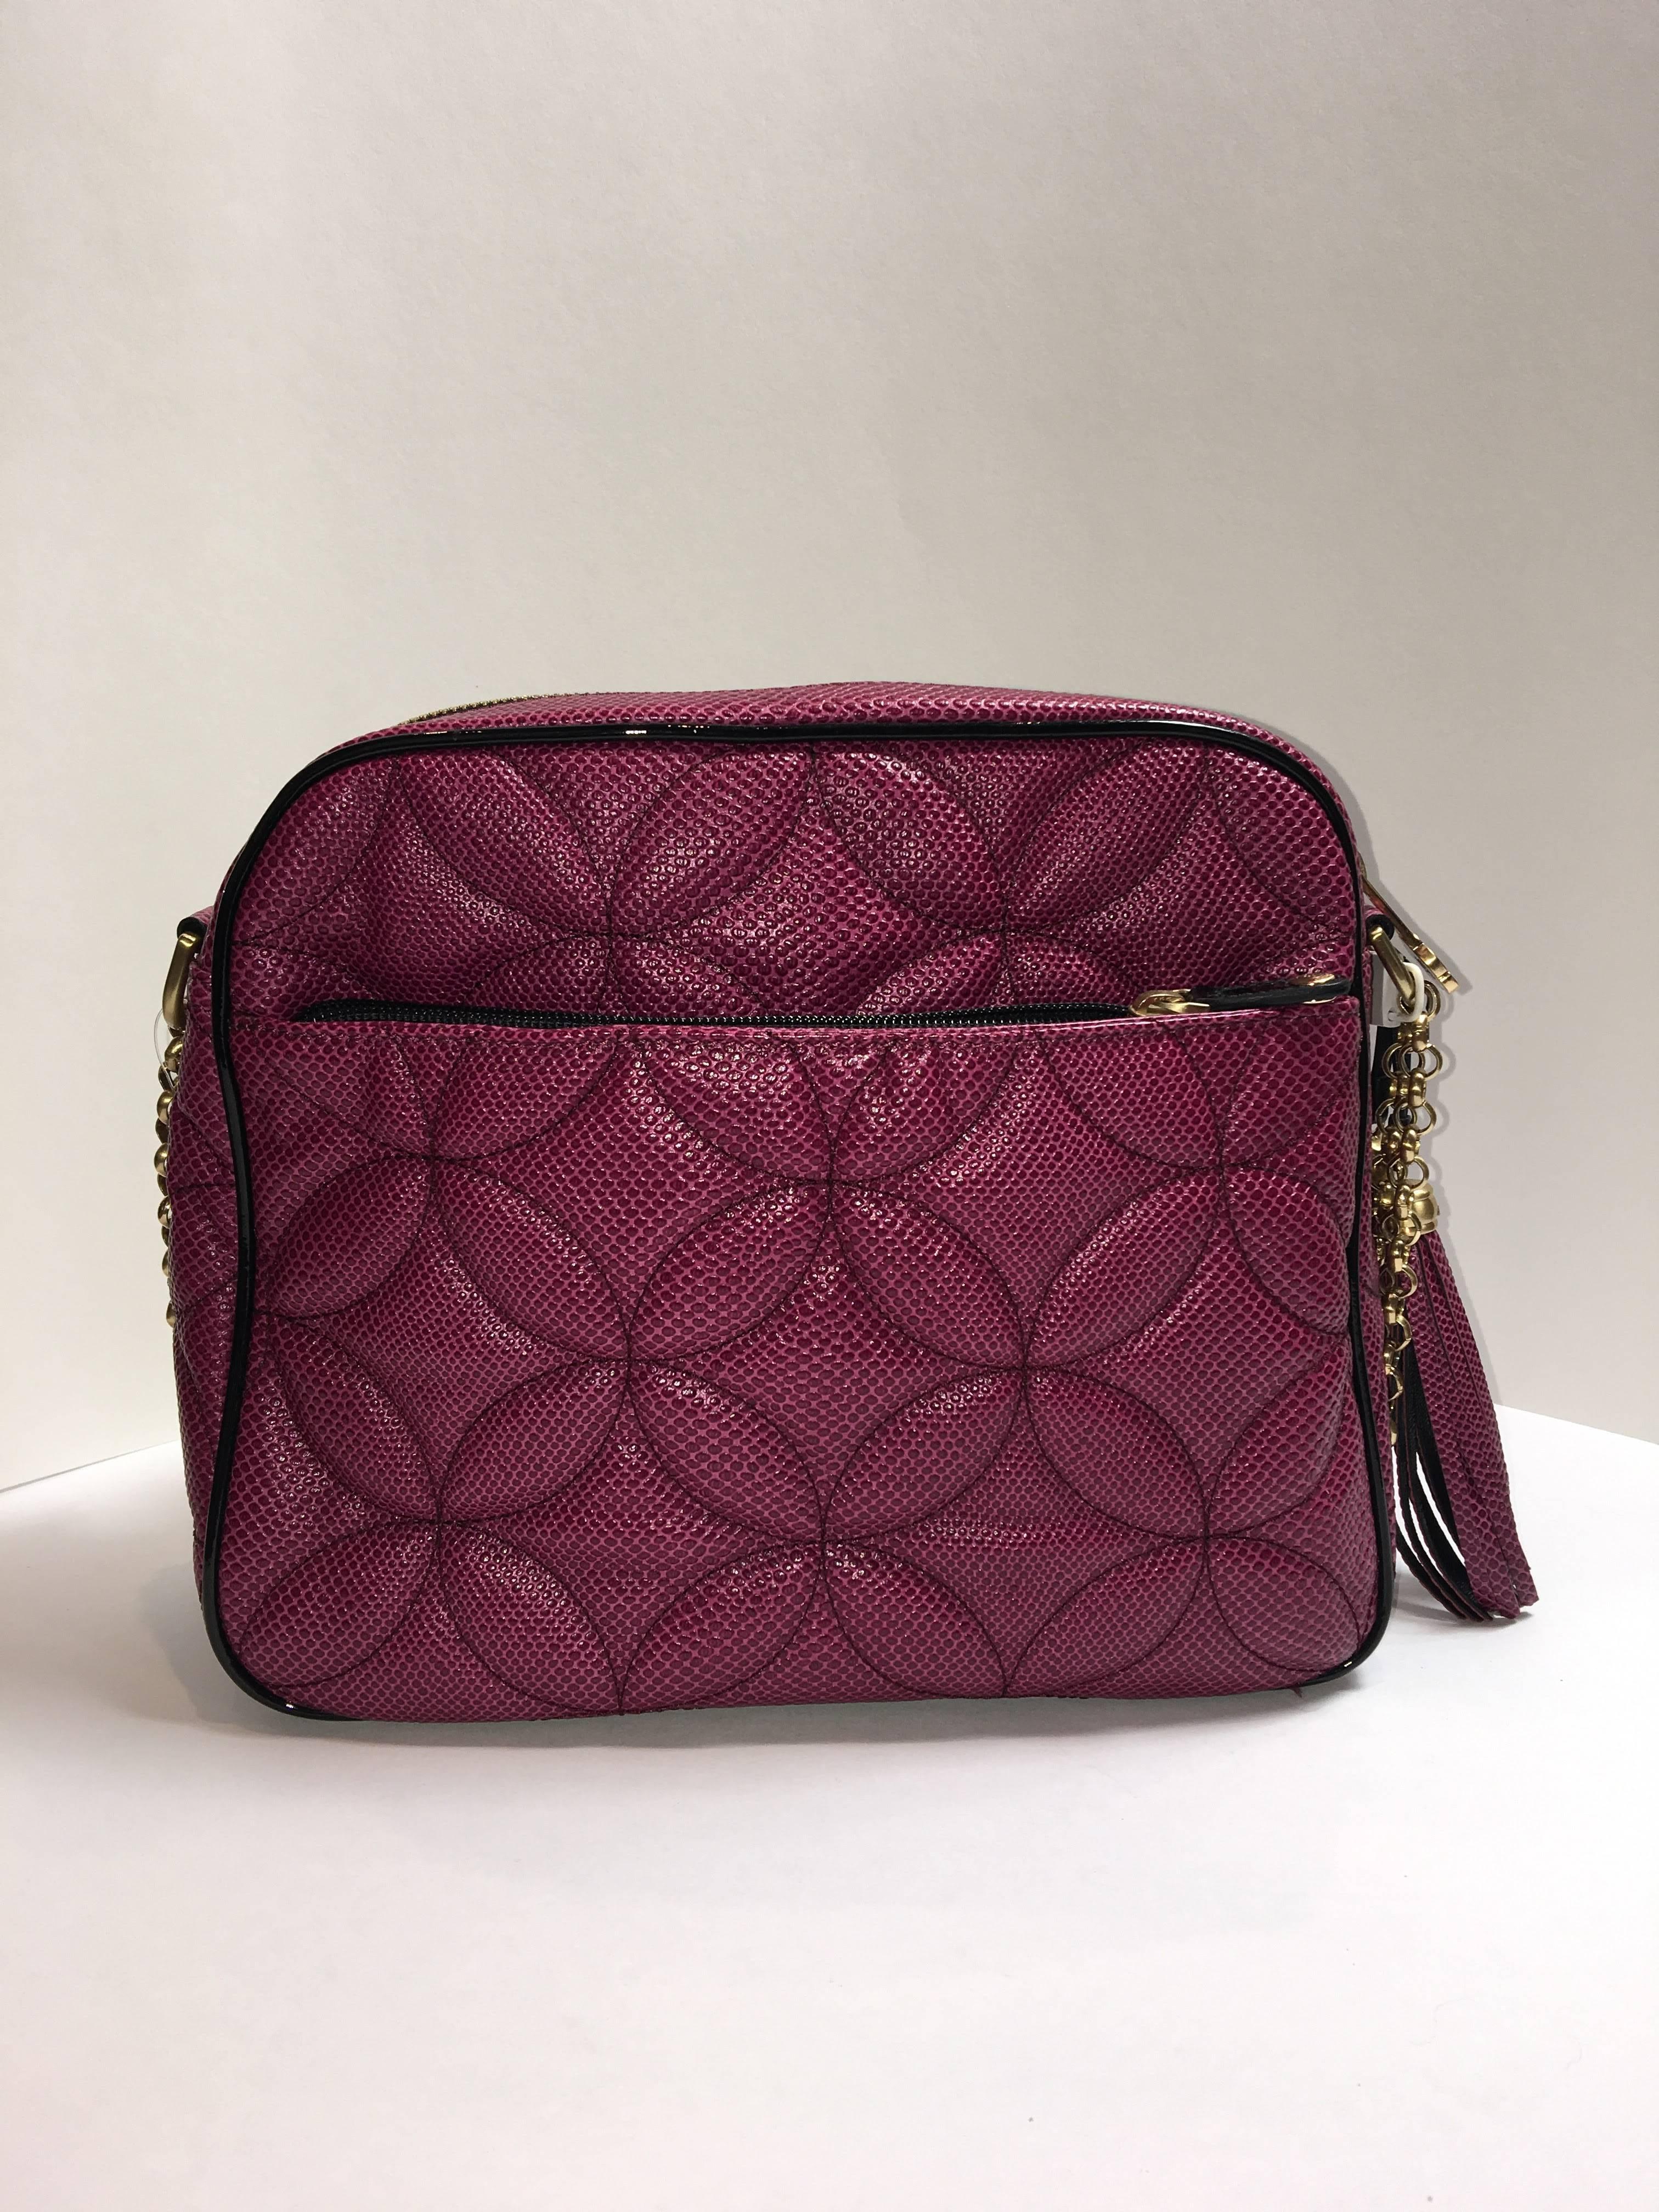 Eric Javits Leather Handbag in Berry leather. 